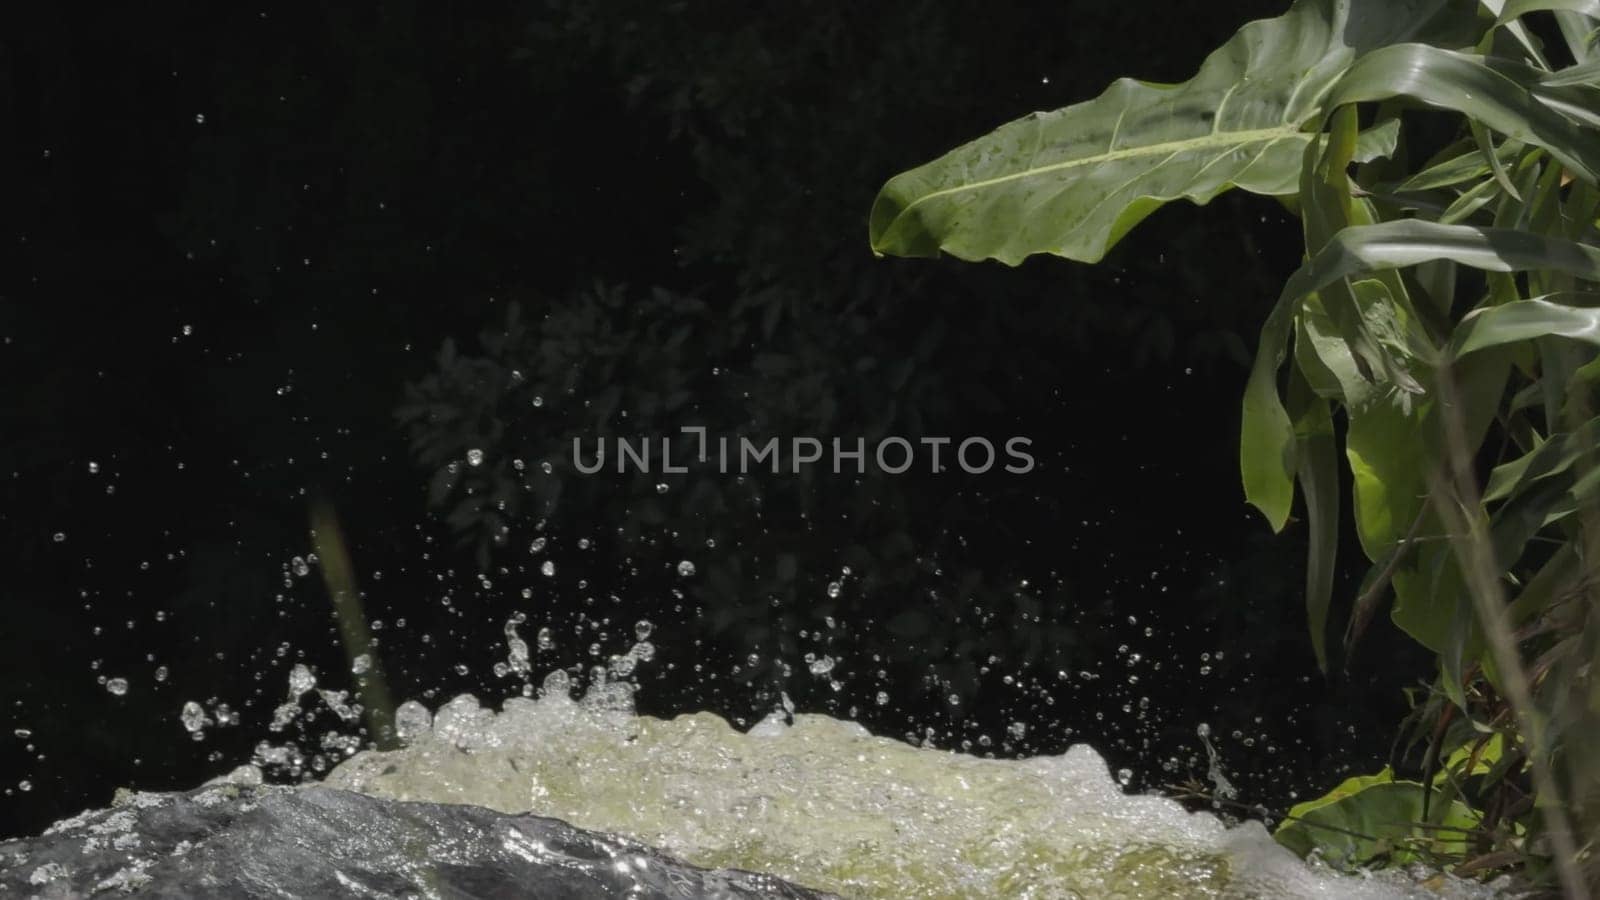 Slow-mo video of water falling into the dark, with a plant observing.